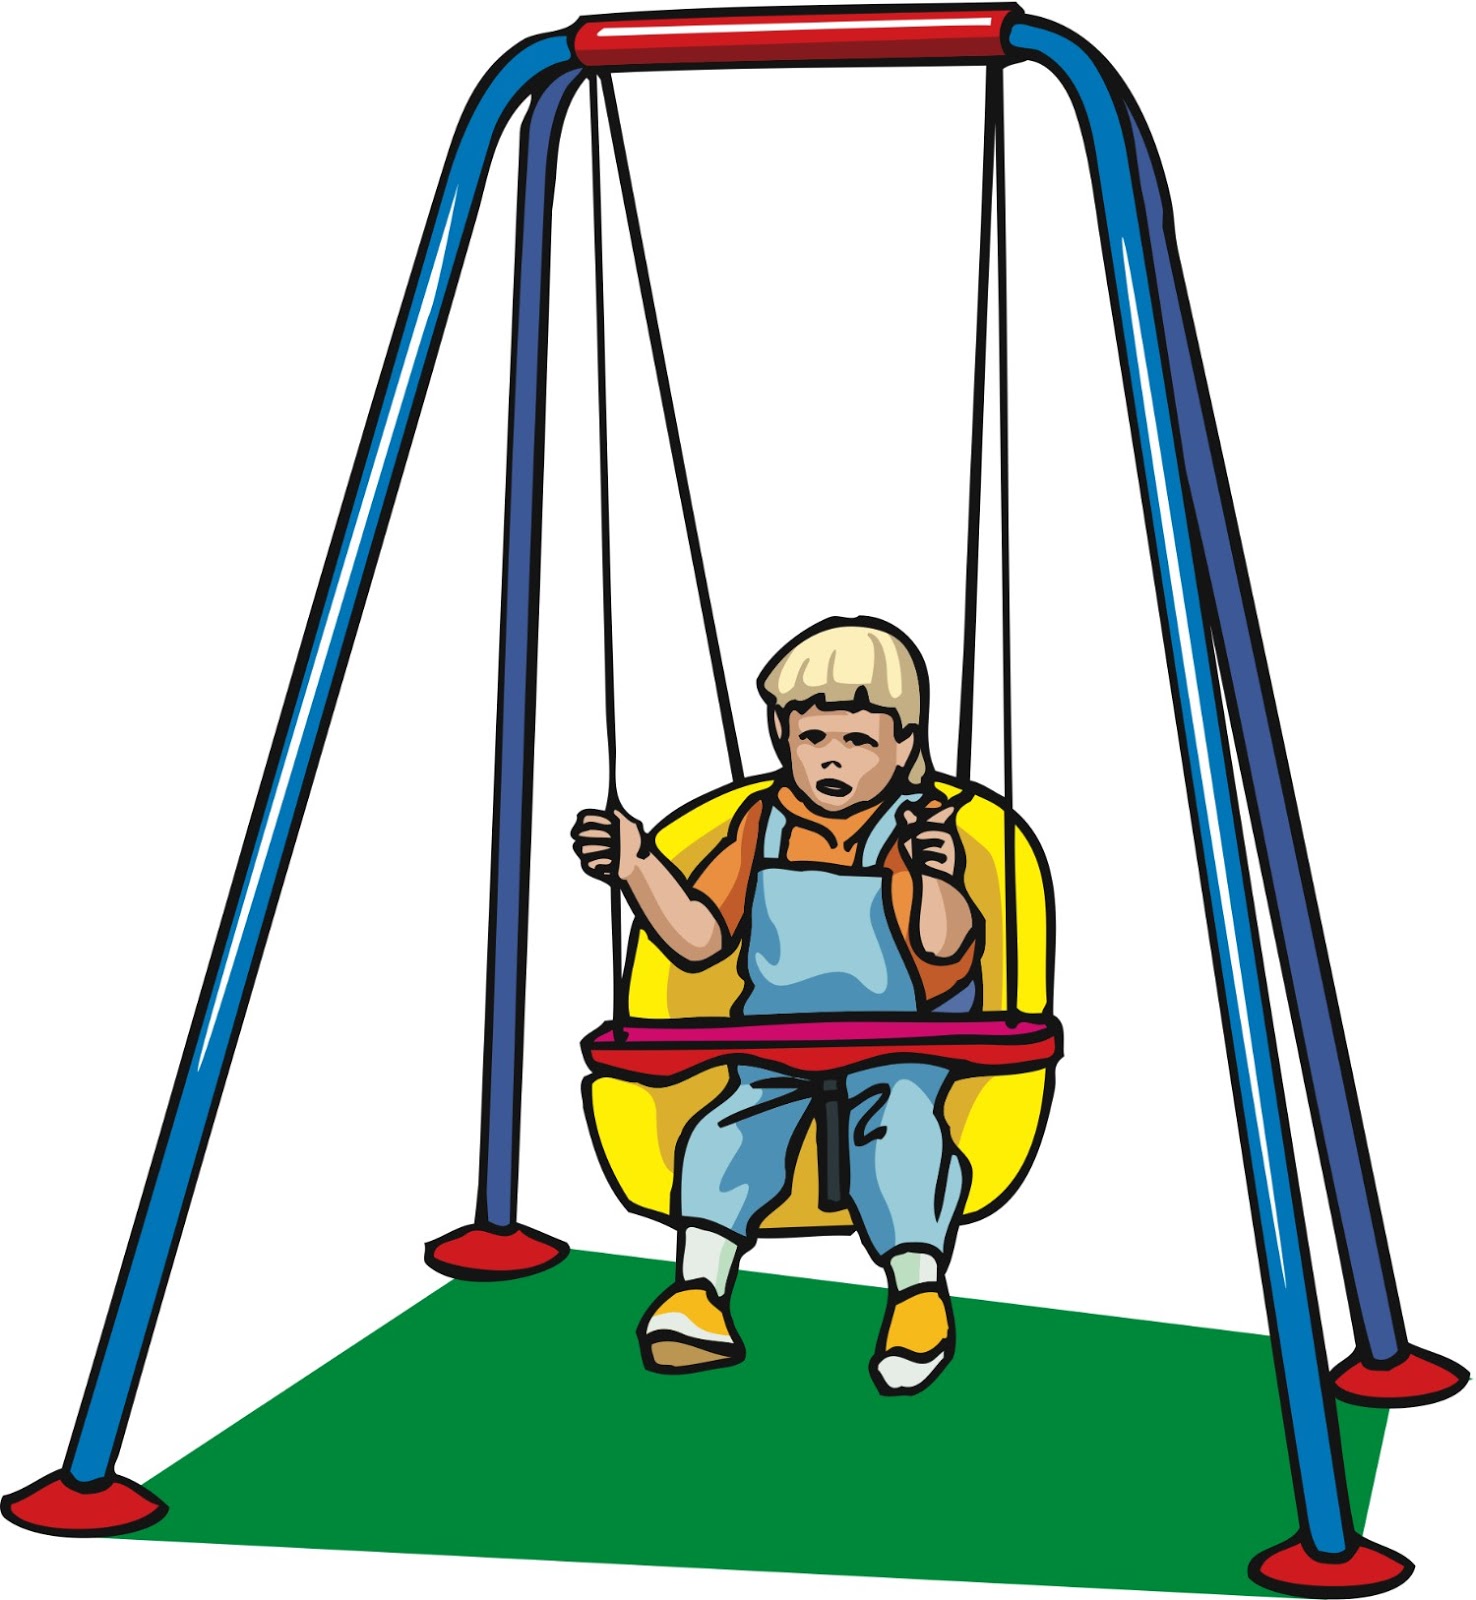 Swing Clipart Lap As My Swing Is On The